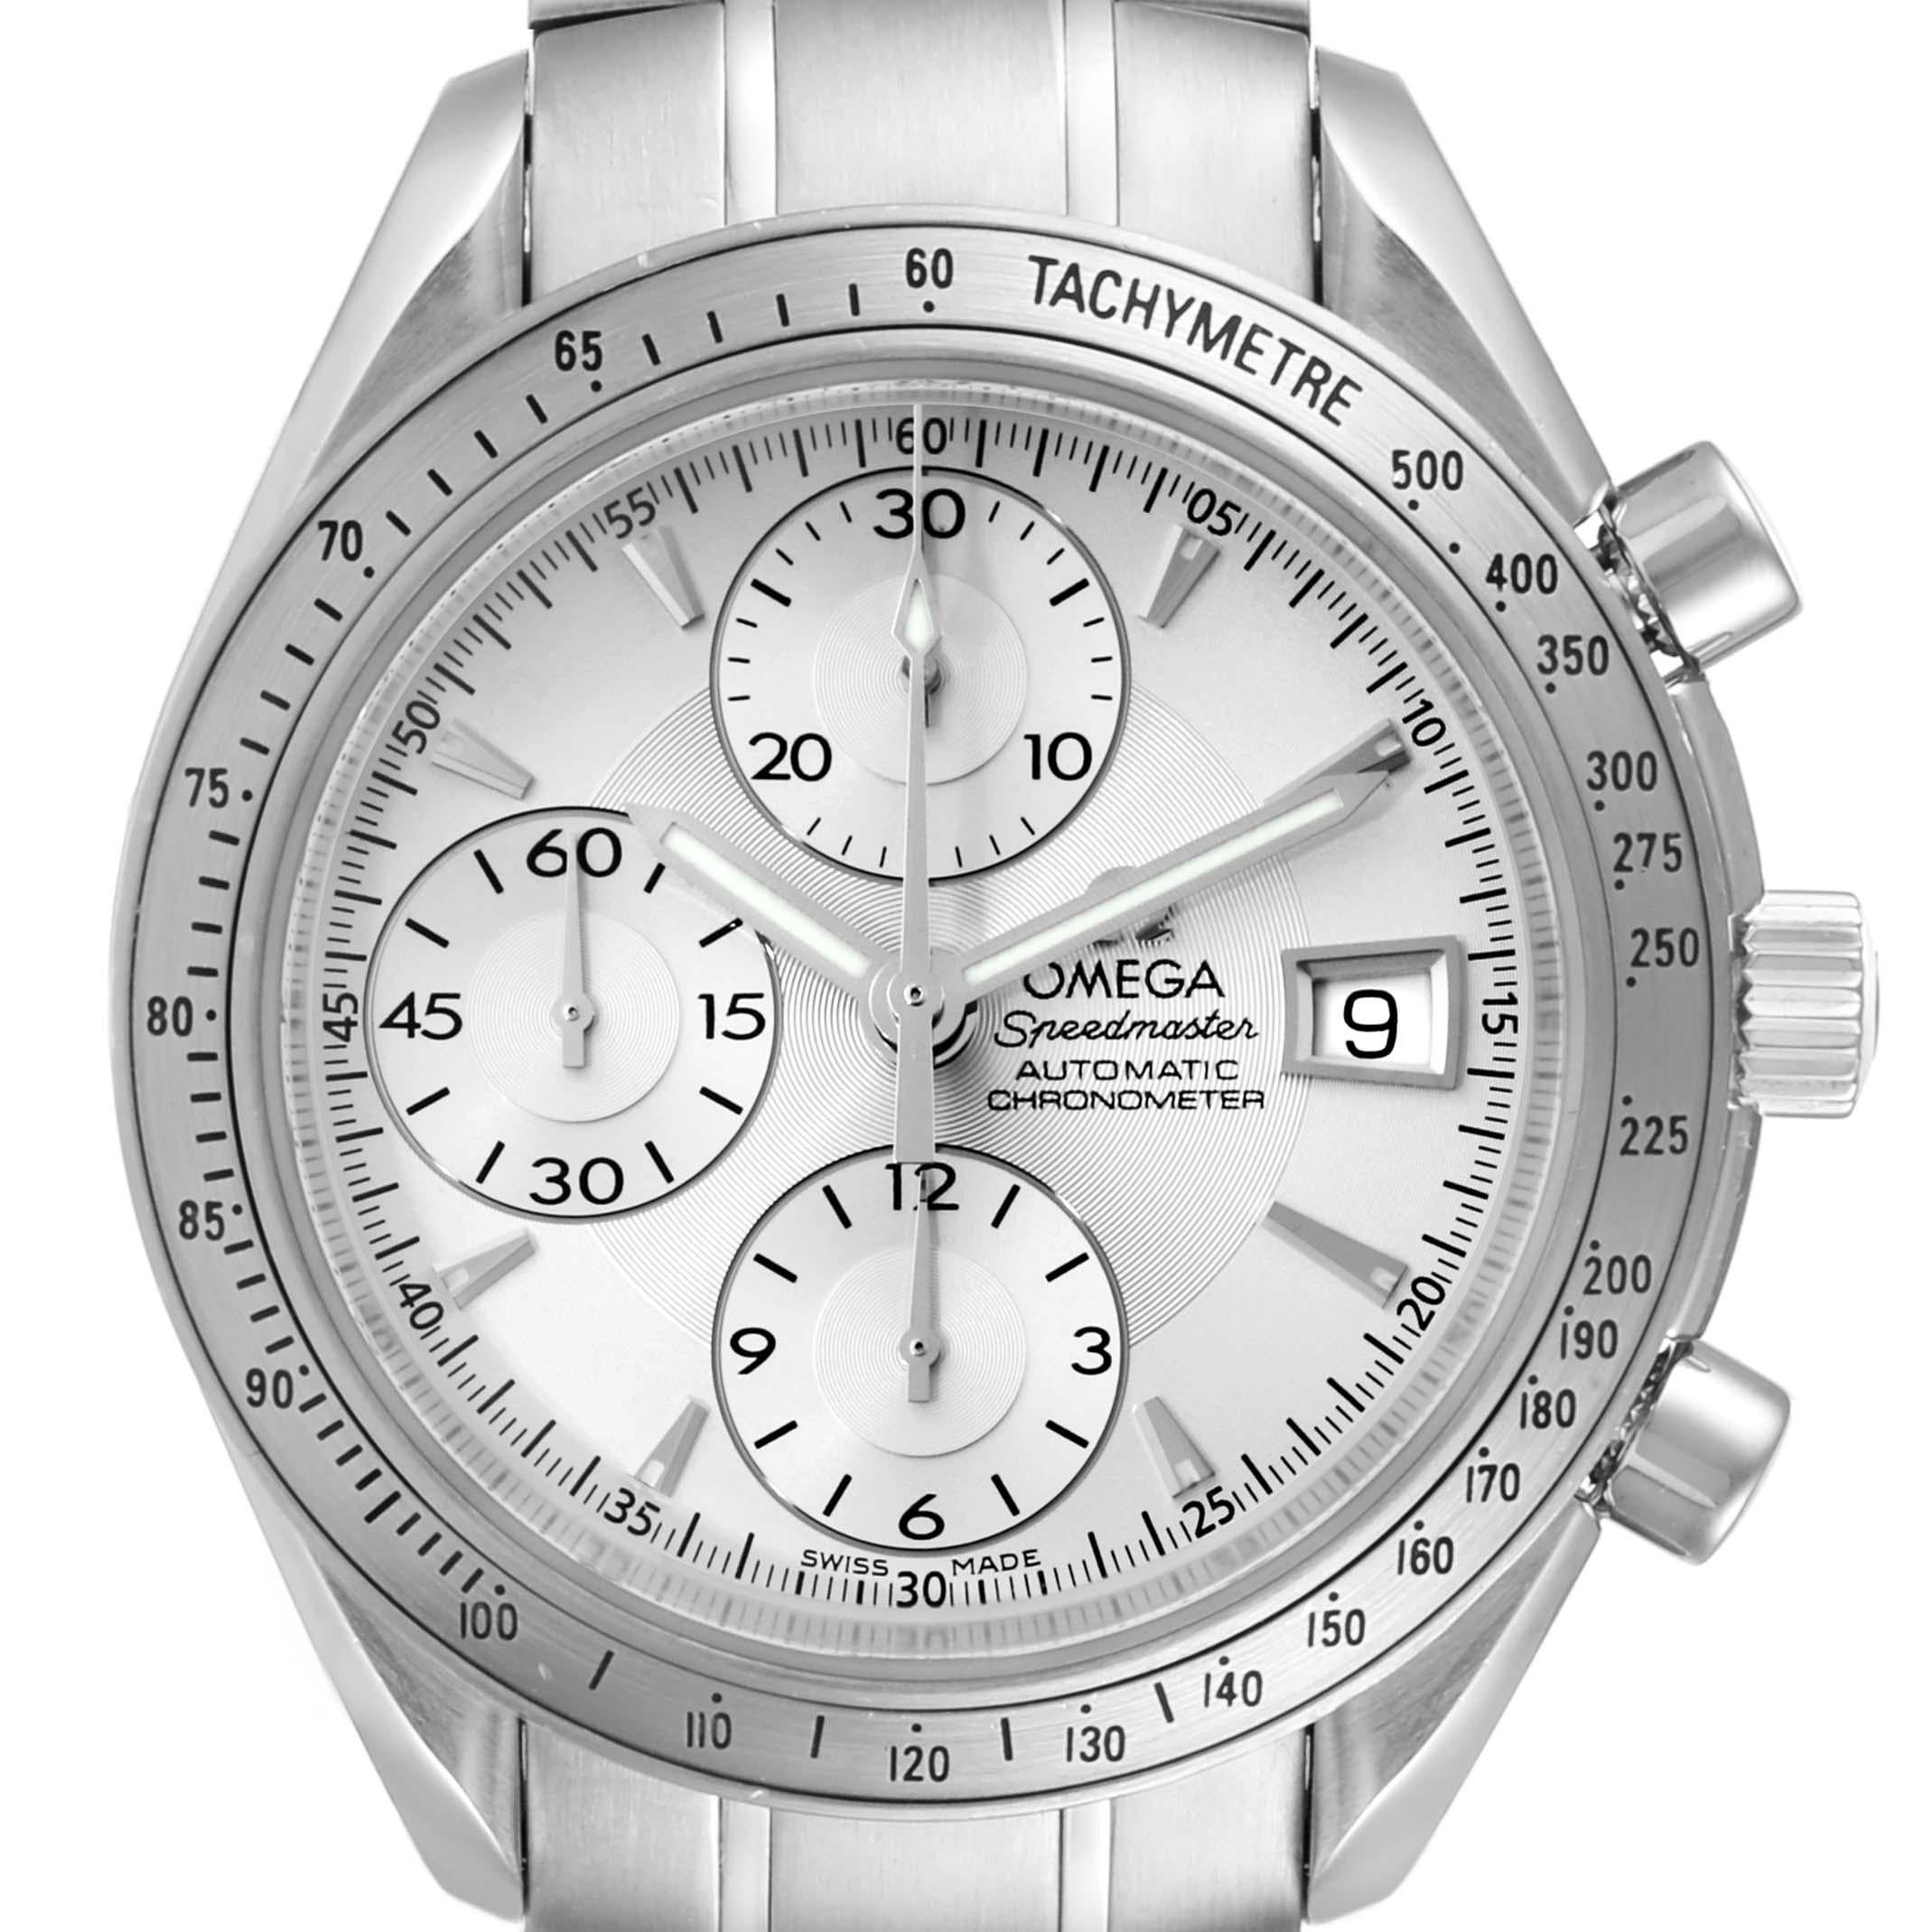 Omega Speedmaster Silver Dial Chronograph Mens Watch 3211.30.00. Automatic self-winding chronograph movement. Caliber 1164. Stainless steel round case 40 mm in diameter. Stainless steel bezel with tachymetre function. Scratch-resistant sapphire